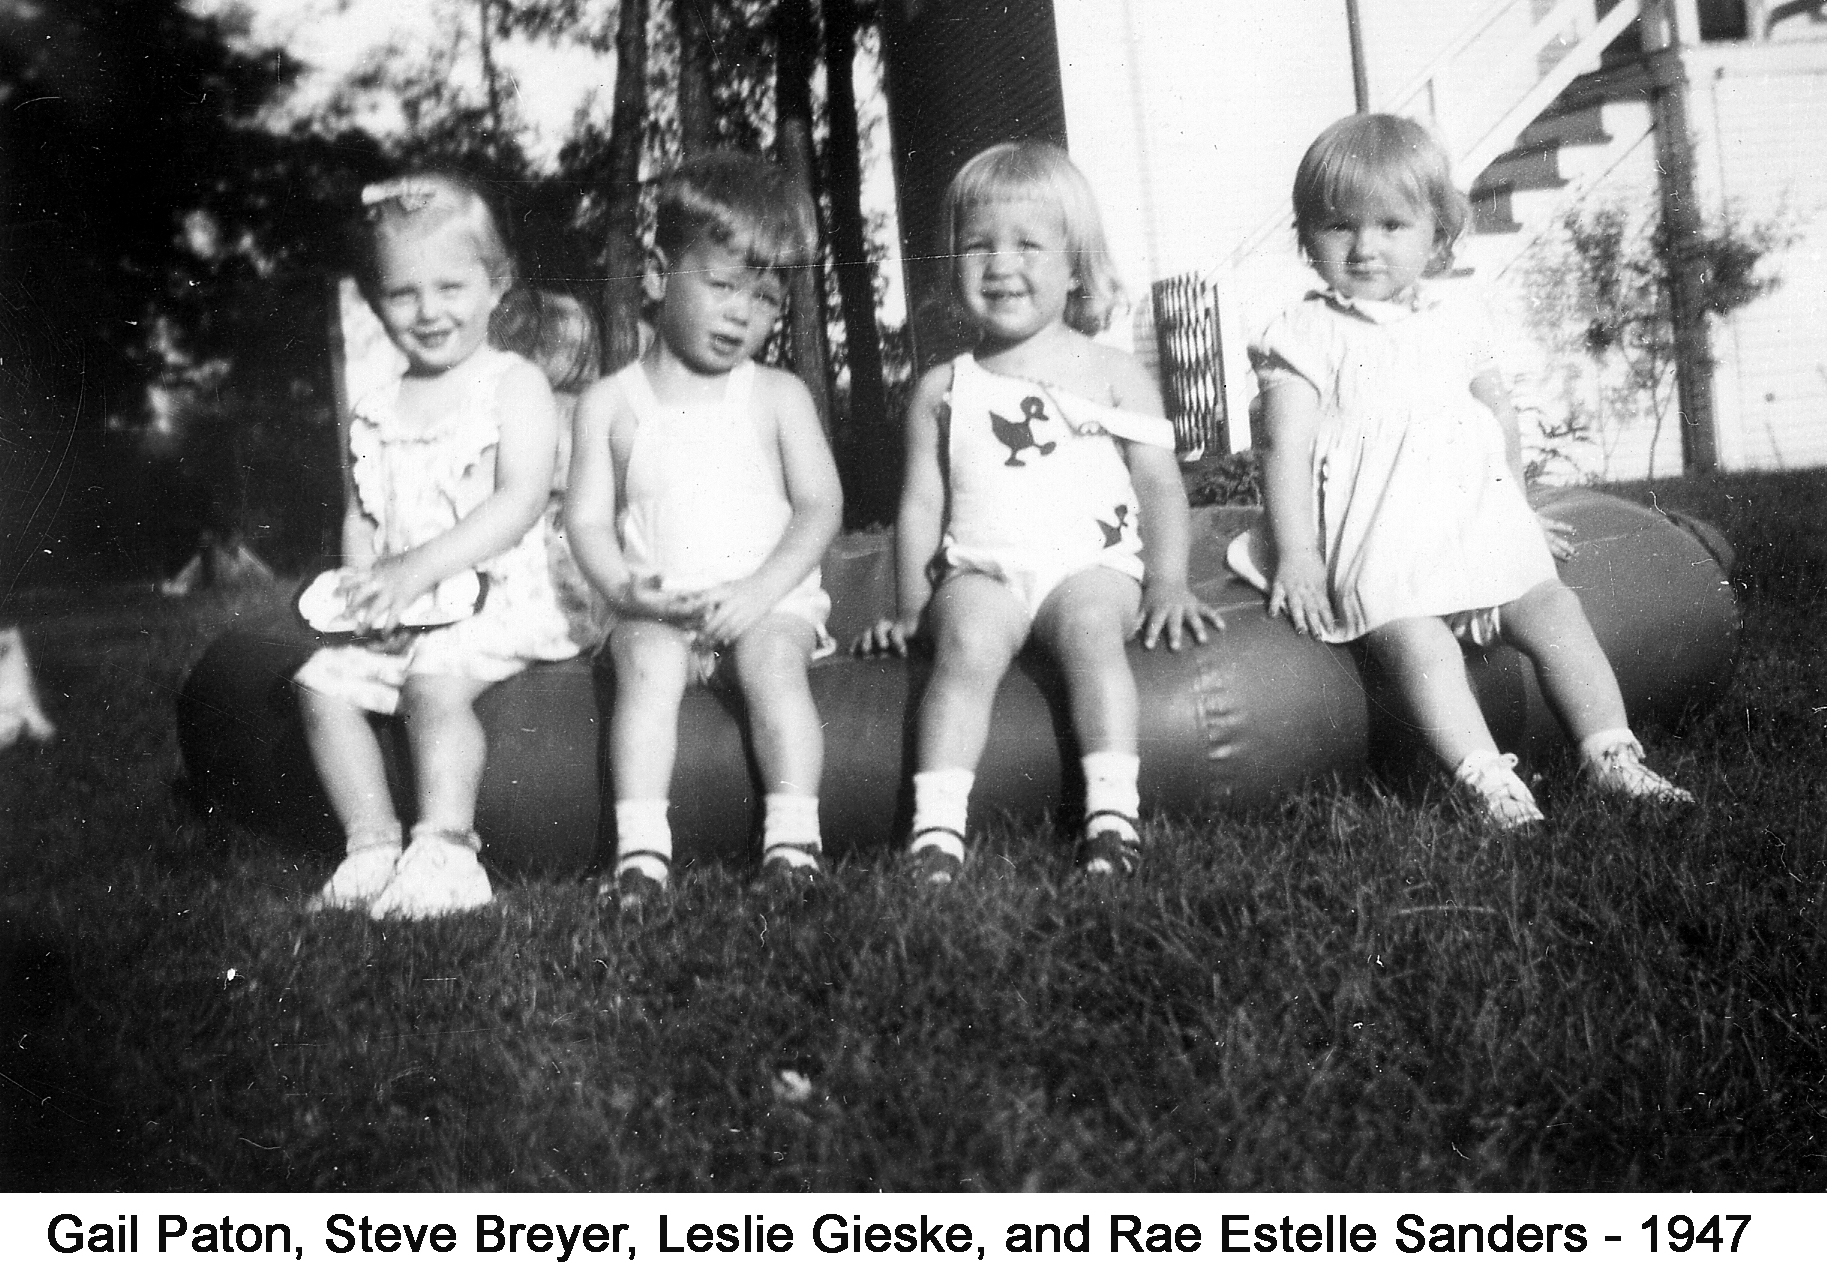 Gail Paton at age 1 1/2 years sitting on a baby pool with three of her cousins